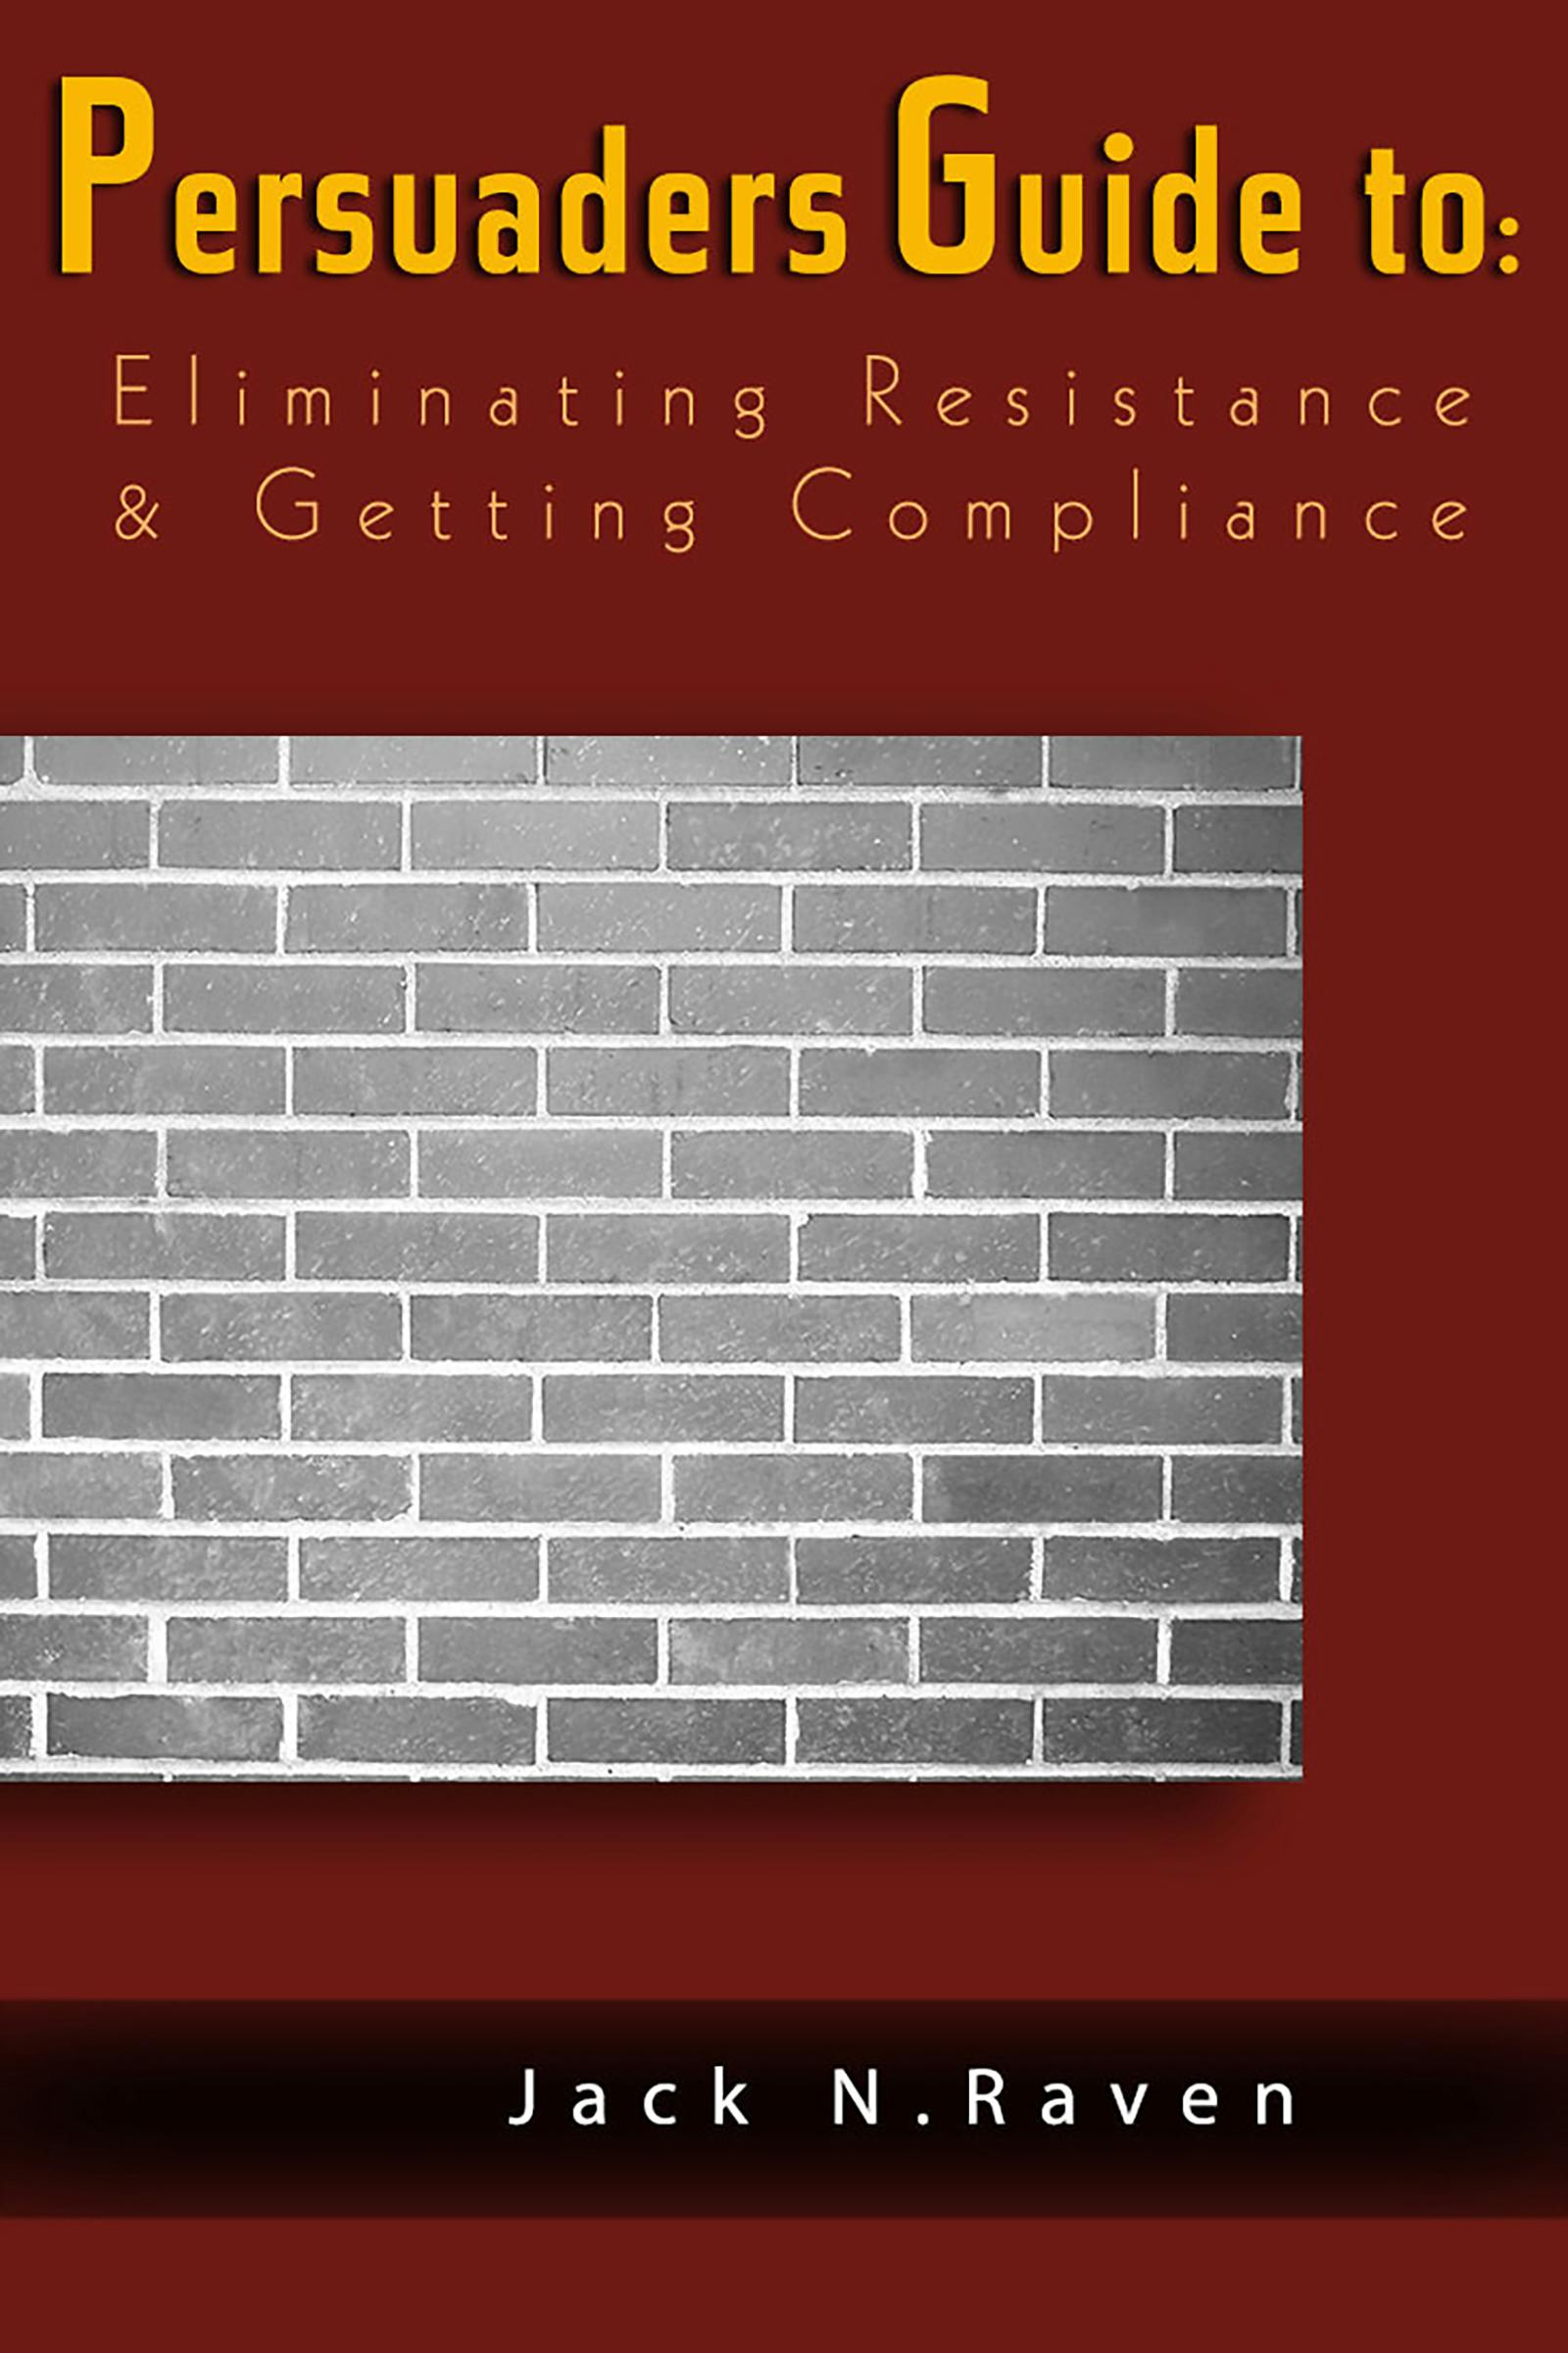 The Persuaders Guide To Eliminating Resistance And Getting Compliance - Jack N. Raven